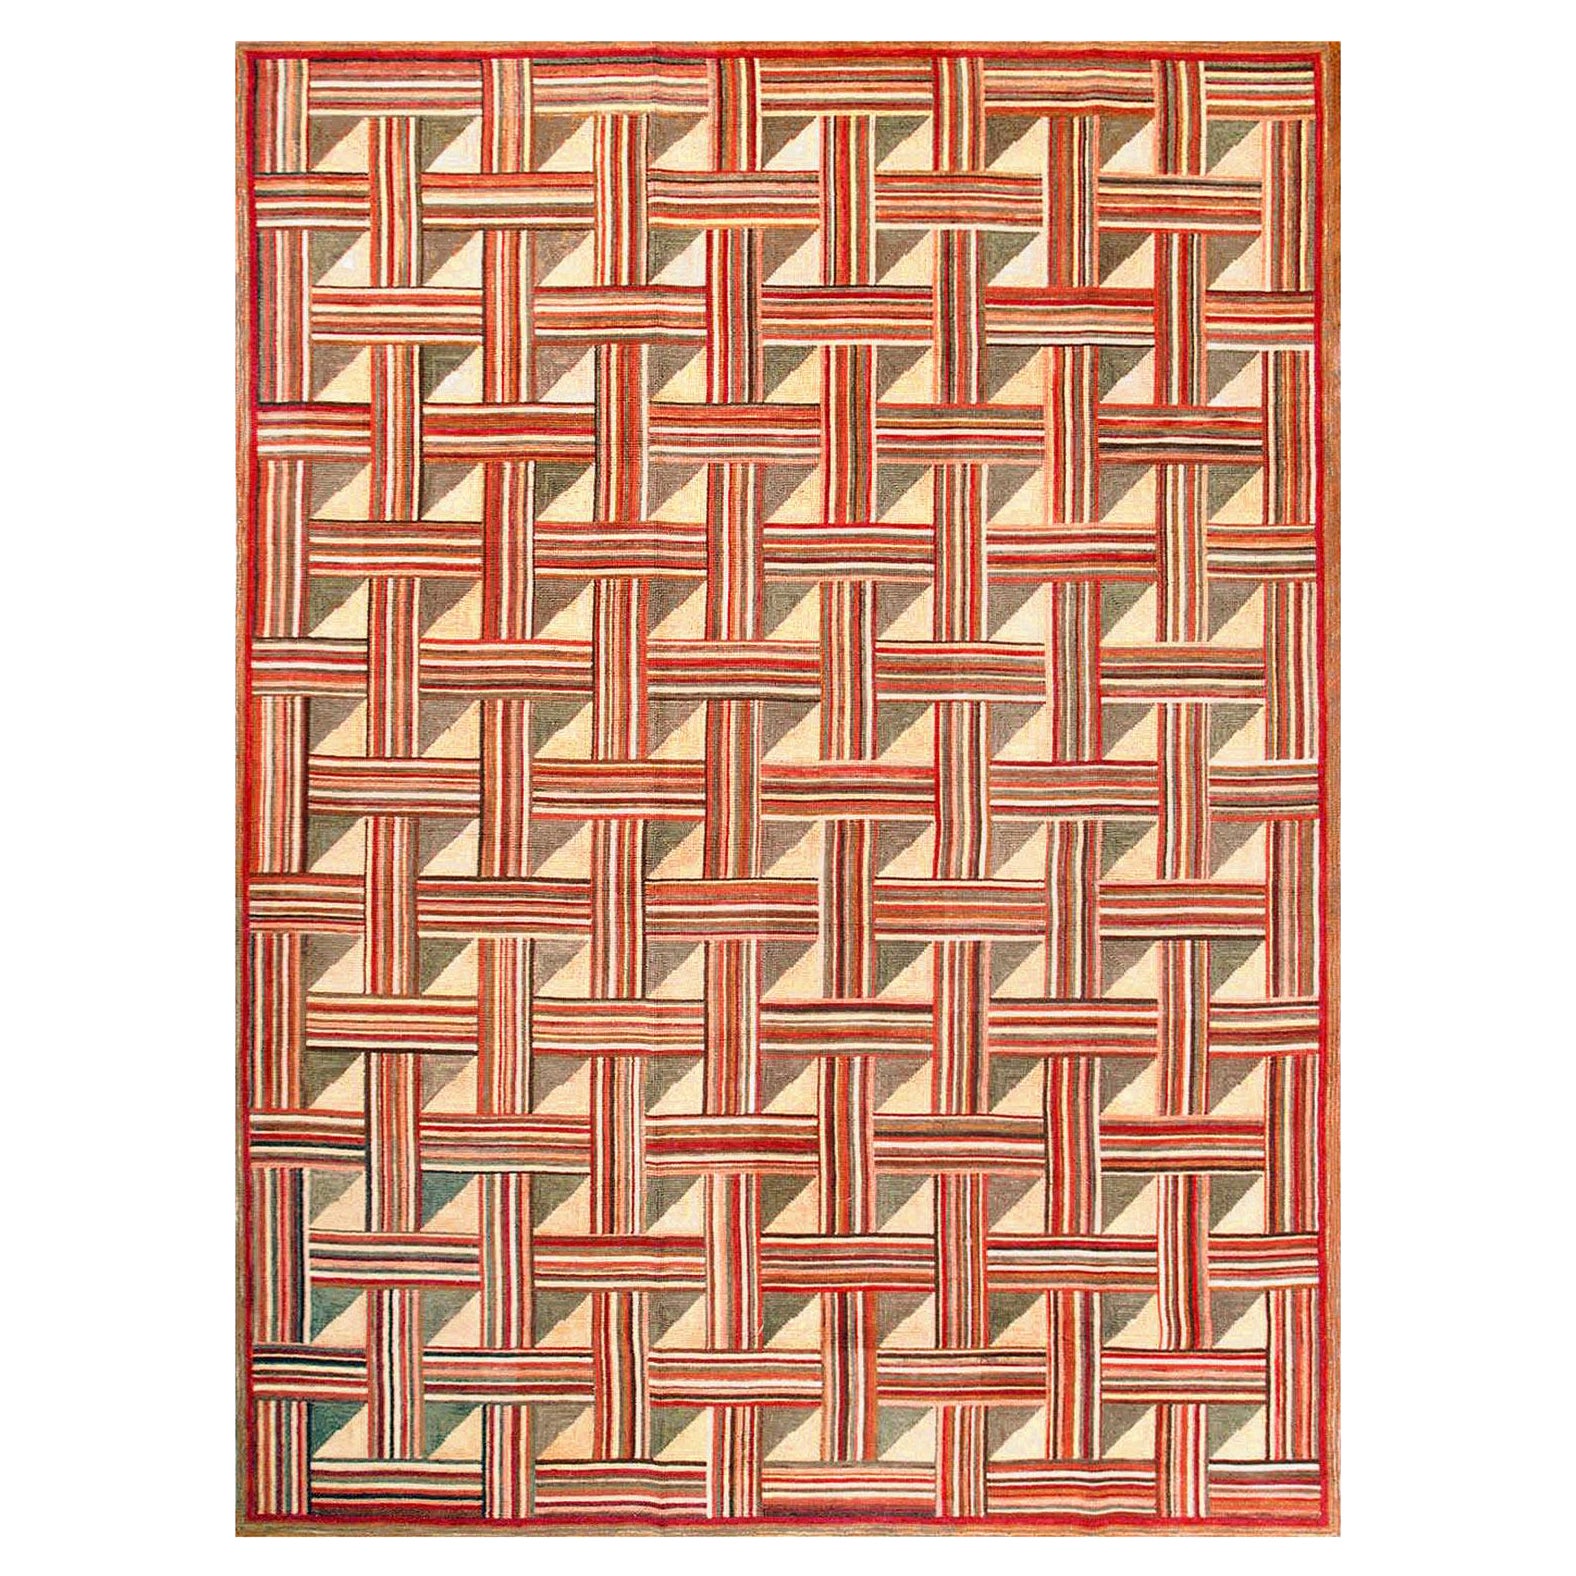 Contemporary  Cotton Hooked Rug 9' 0" x 12' 0" (274 x 366 cm) For Sale